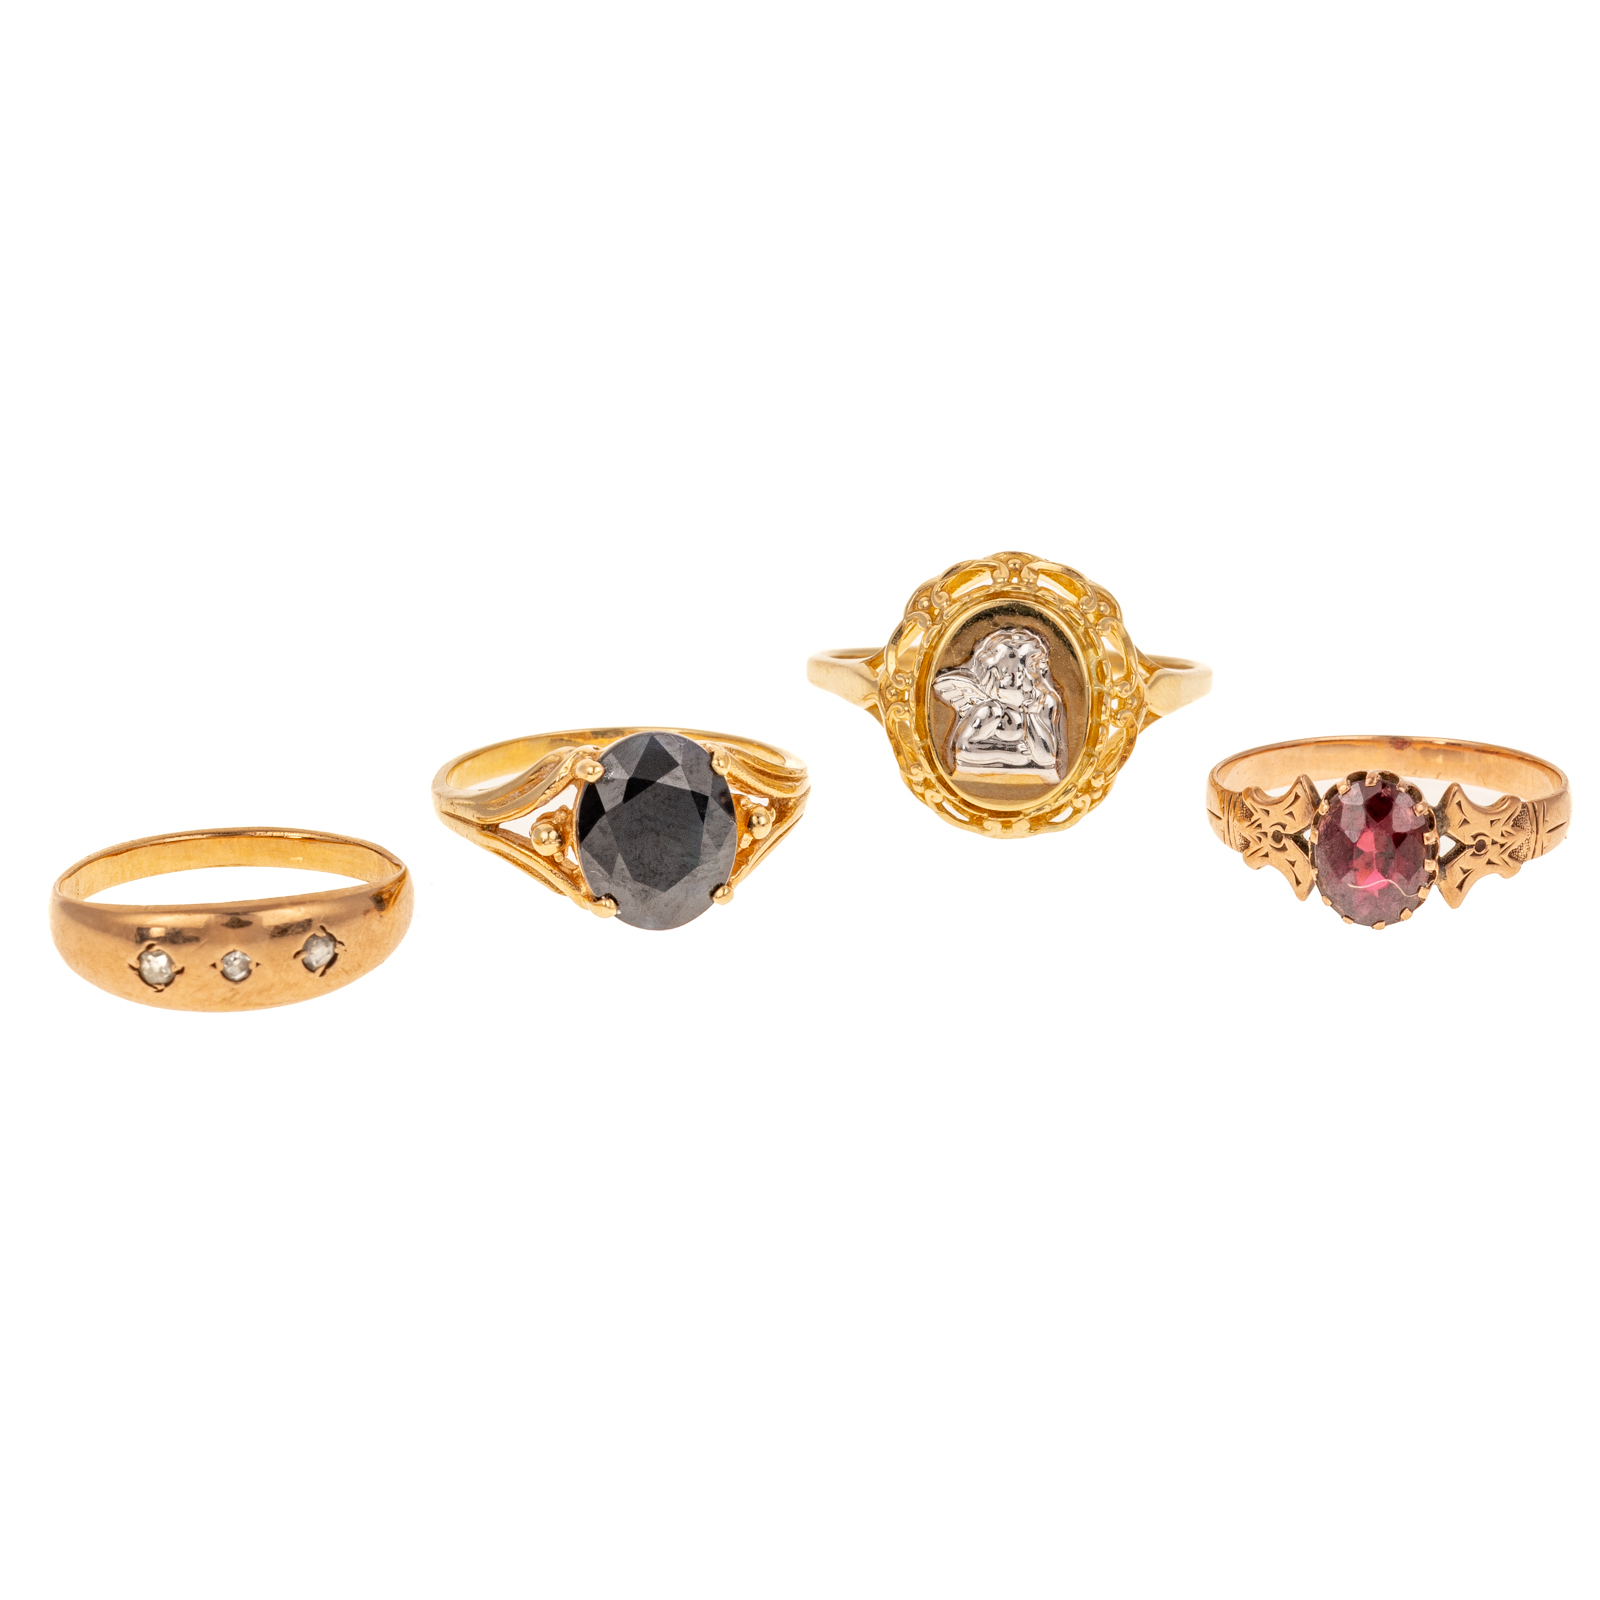 A COLLECTION OF GEMSTONE & DIAMOND